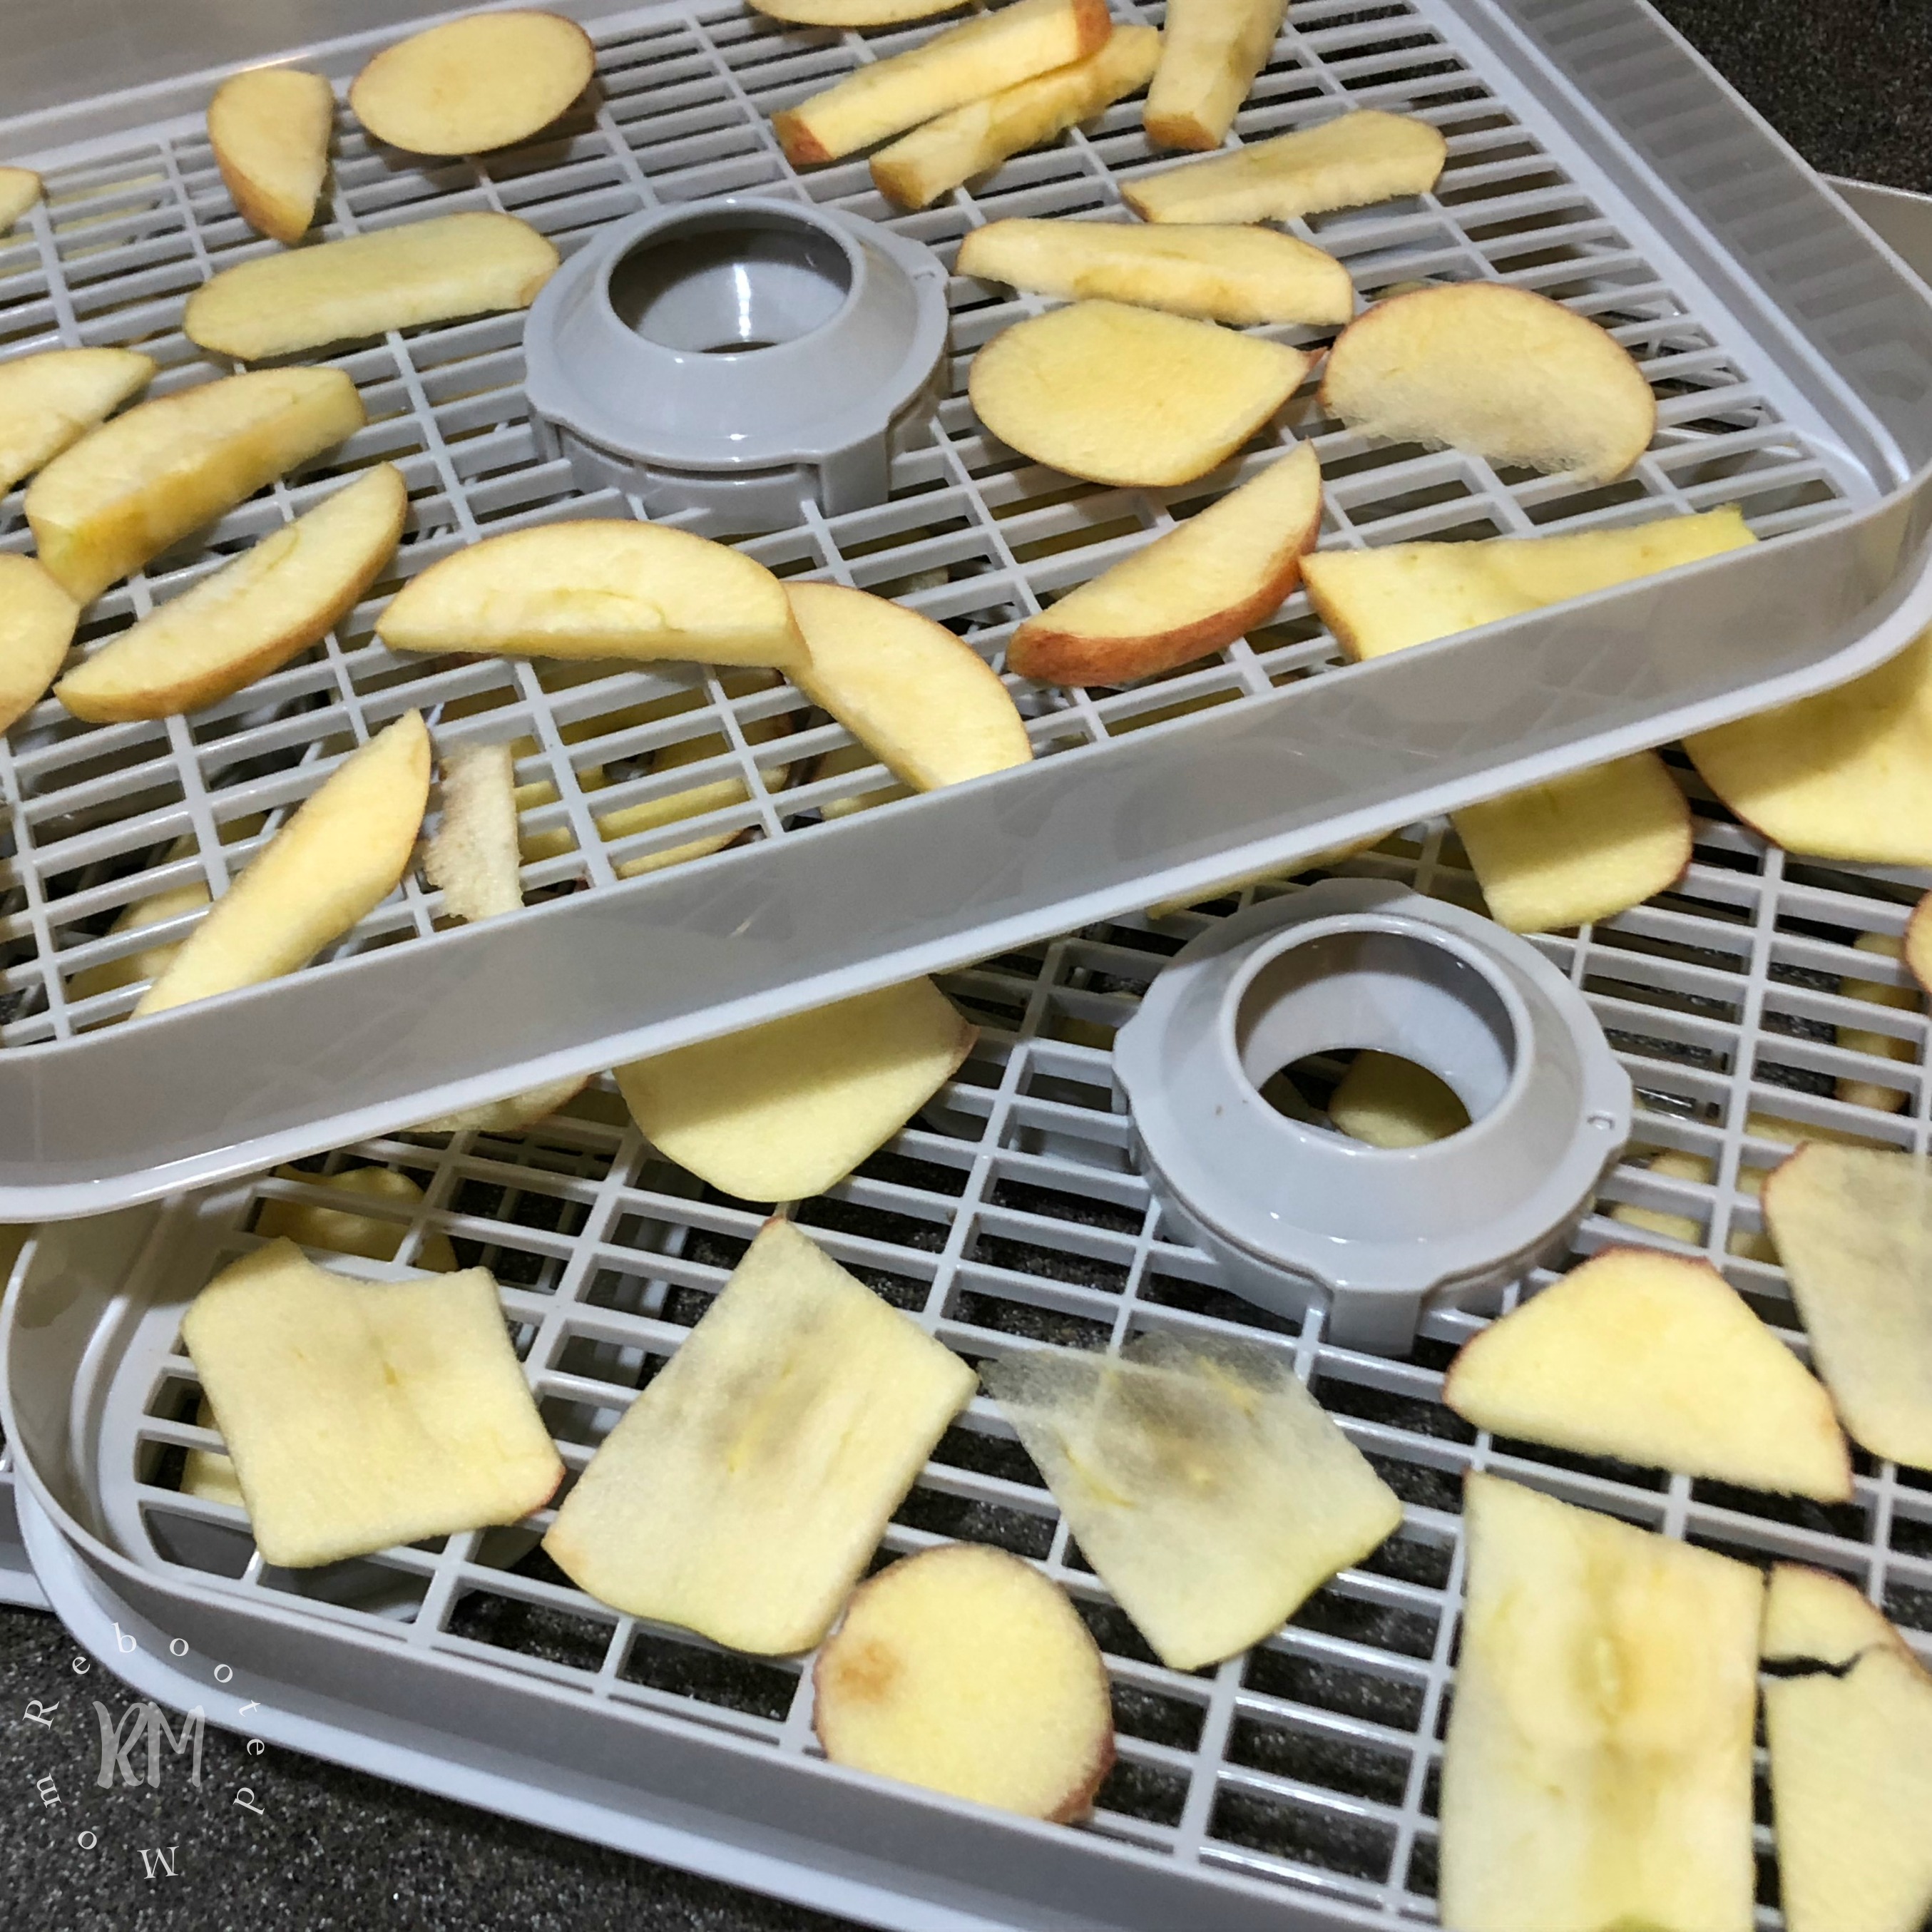 Learn the best way to make dehydrated apples in the dehydrator so you can make dehydrated apples as a healthy snack for your family.